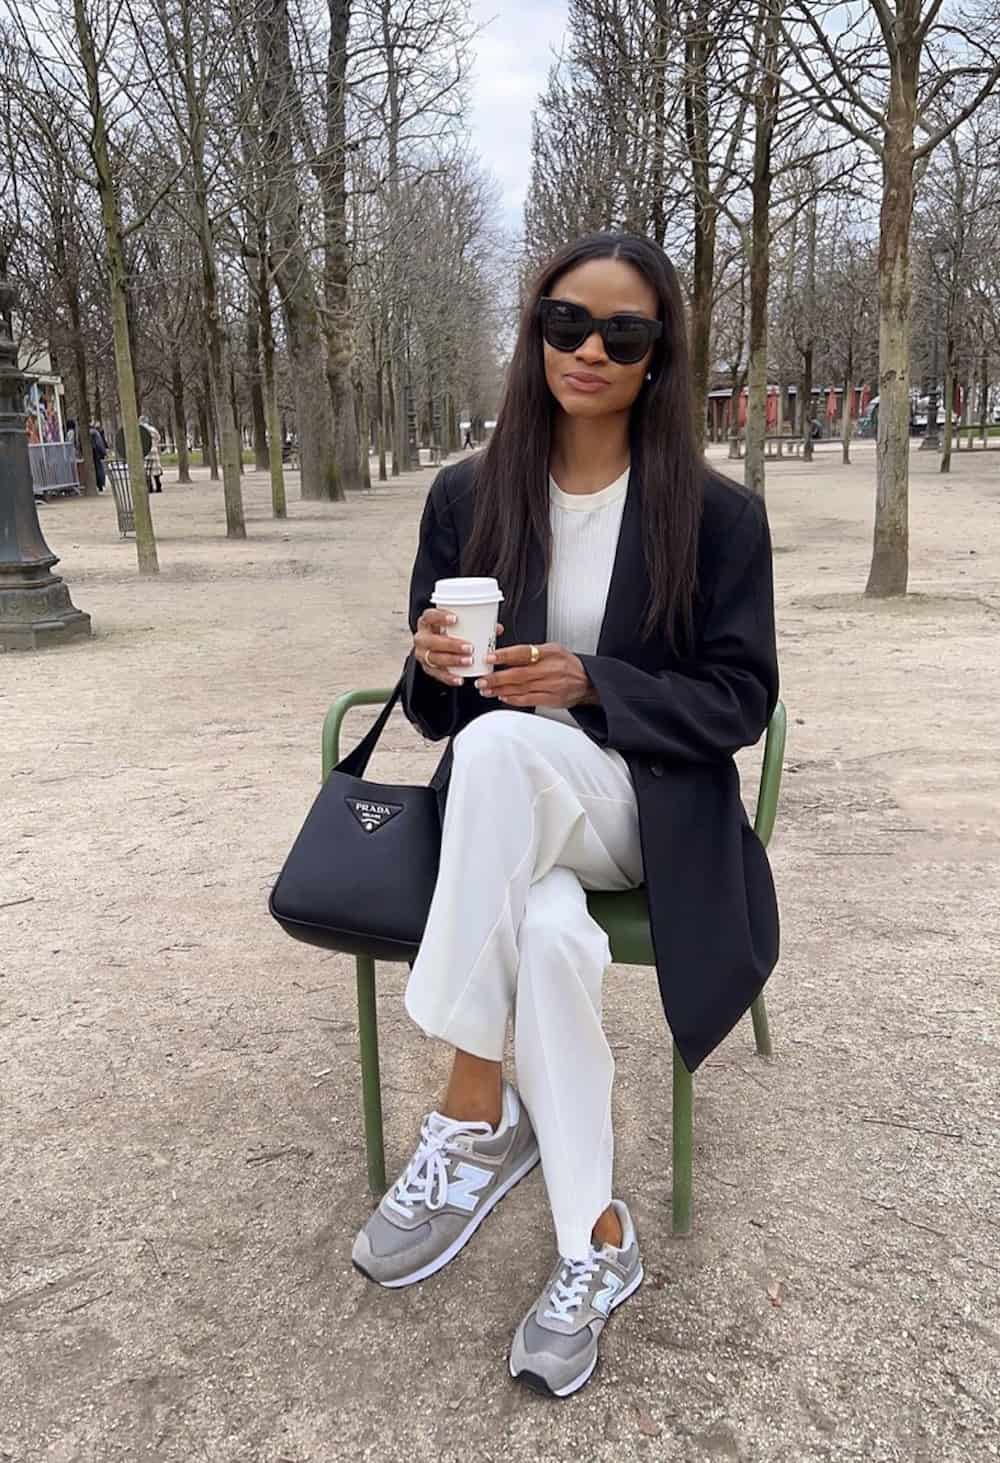 image of a black woman sitting on a park bench wearing an oversized blazer, white trousers, a white shirt, and athletic sneakers